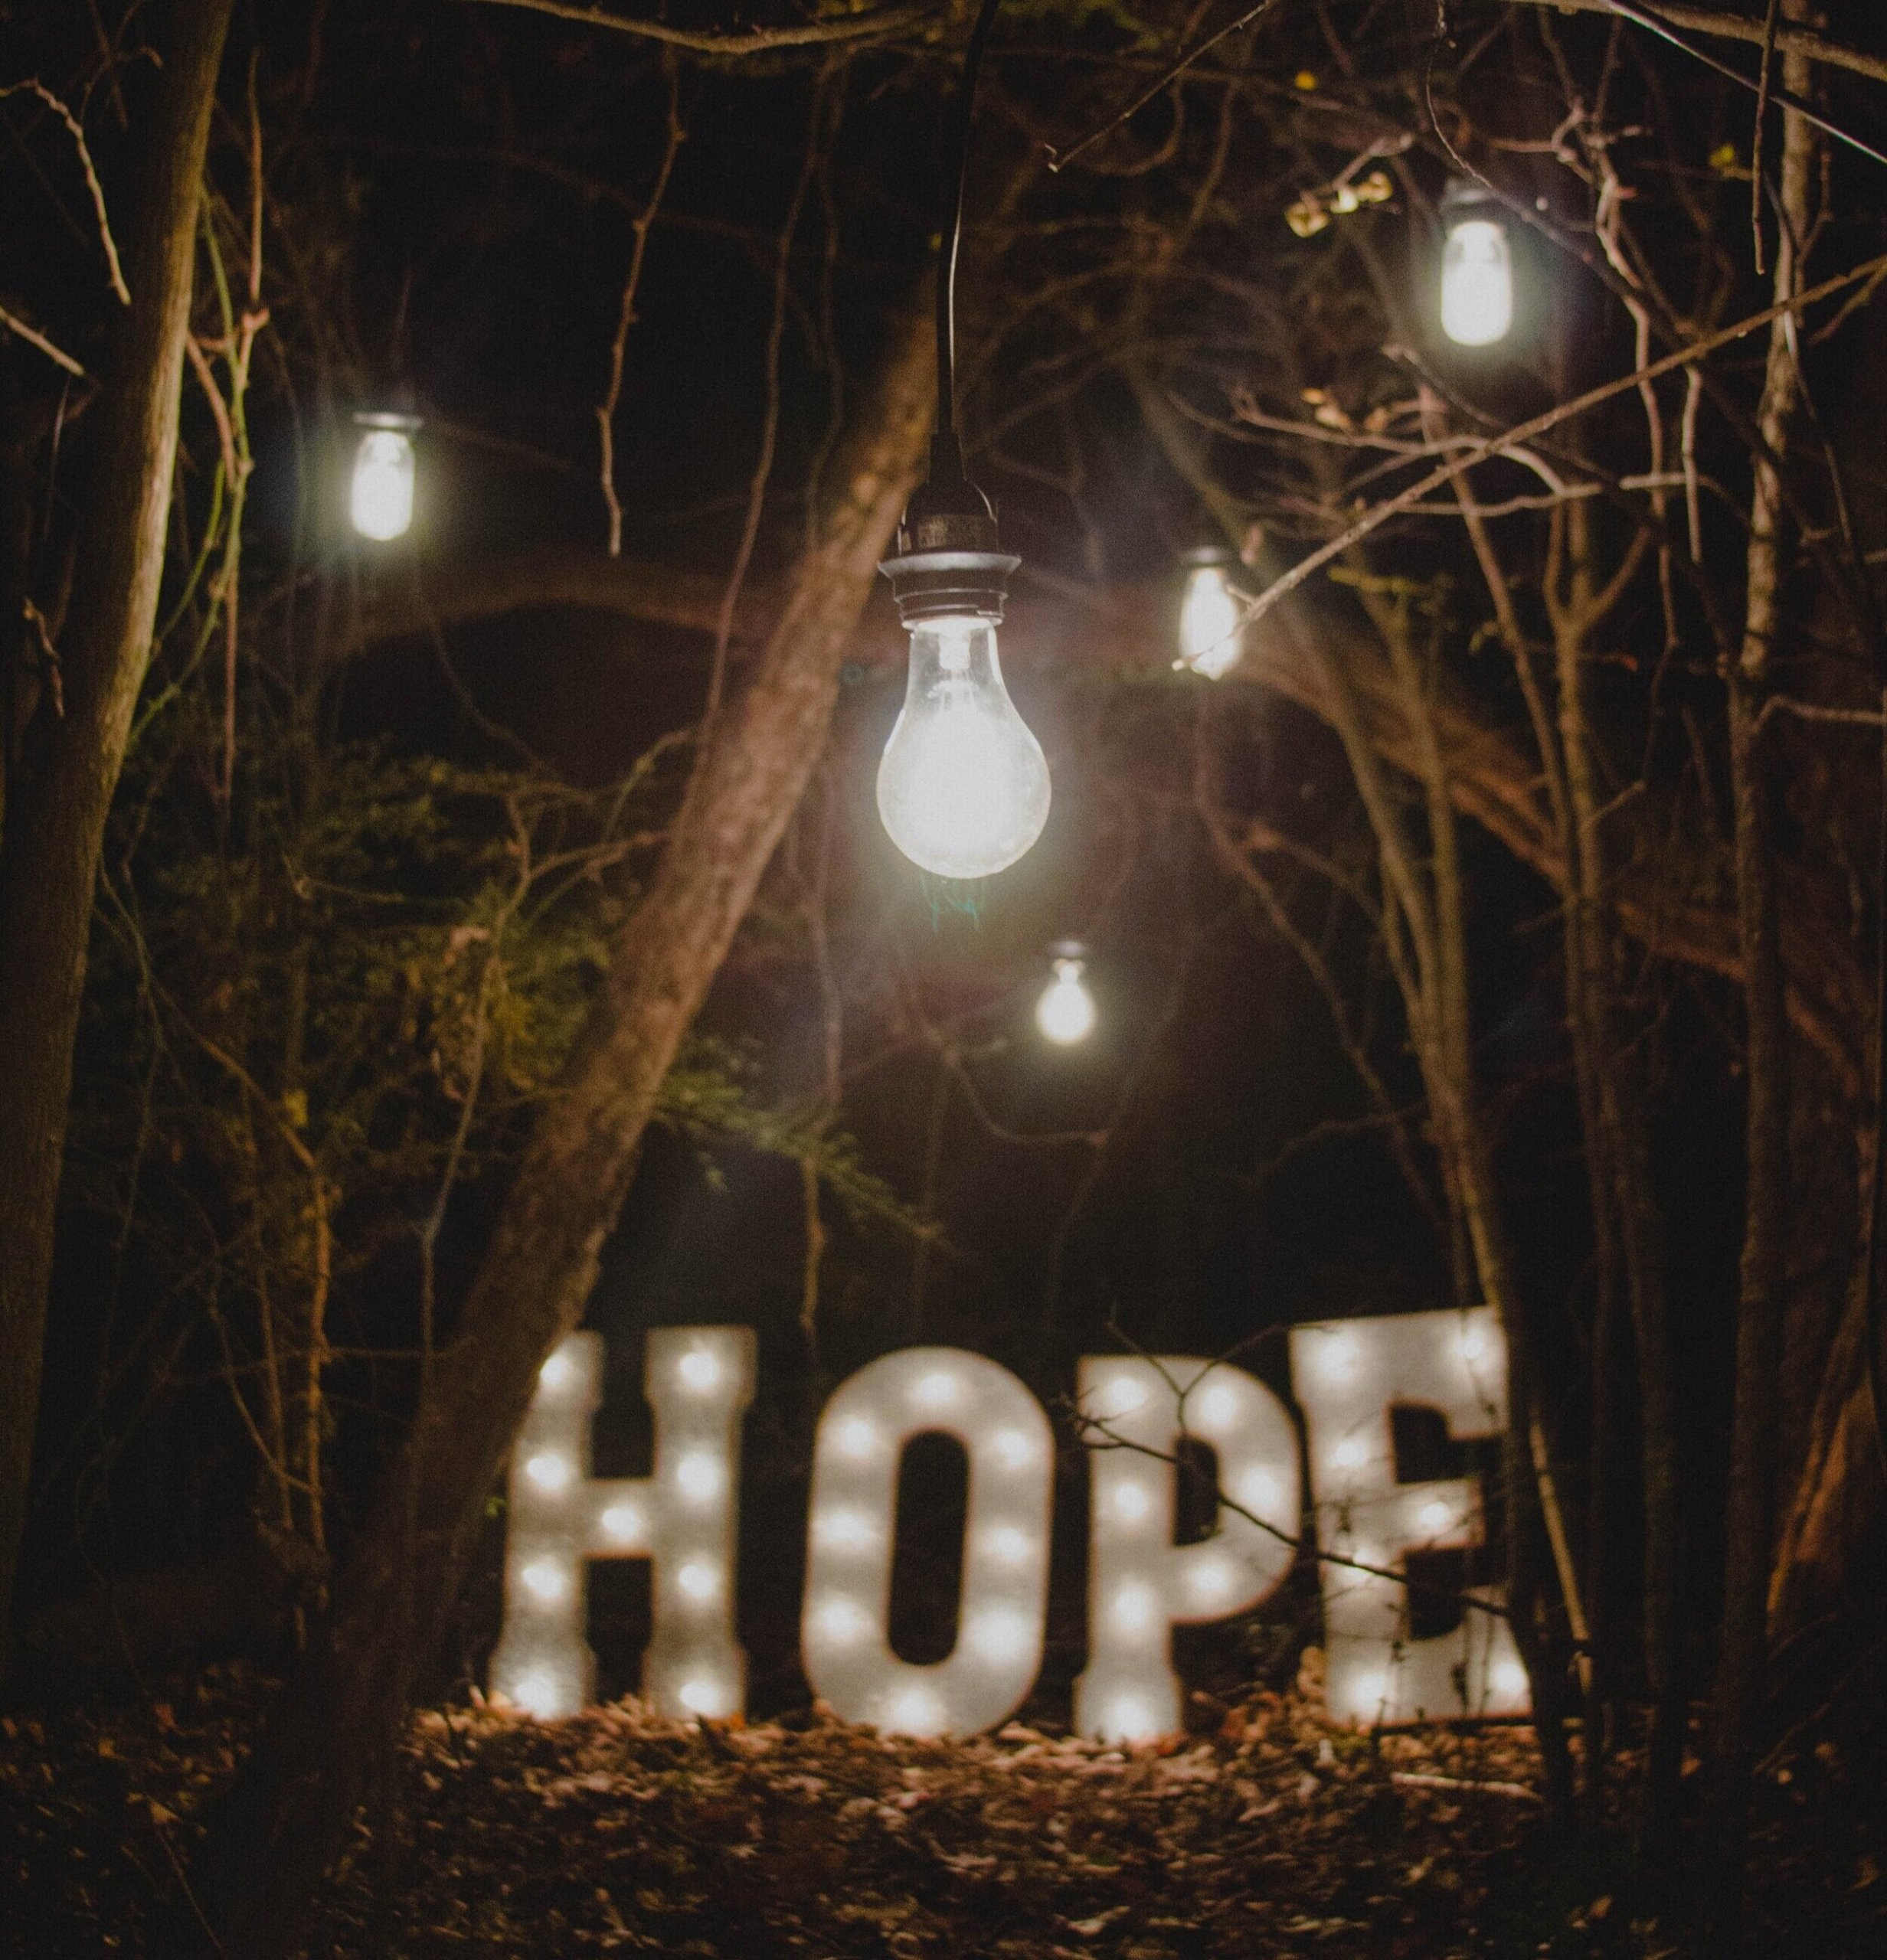 The word Hope lit up in lights in a forest with string lights hanging